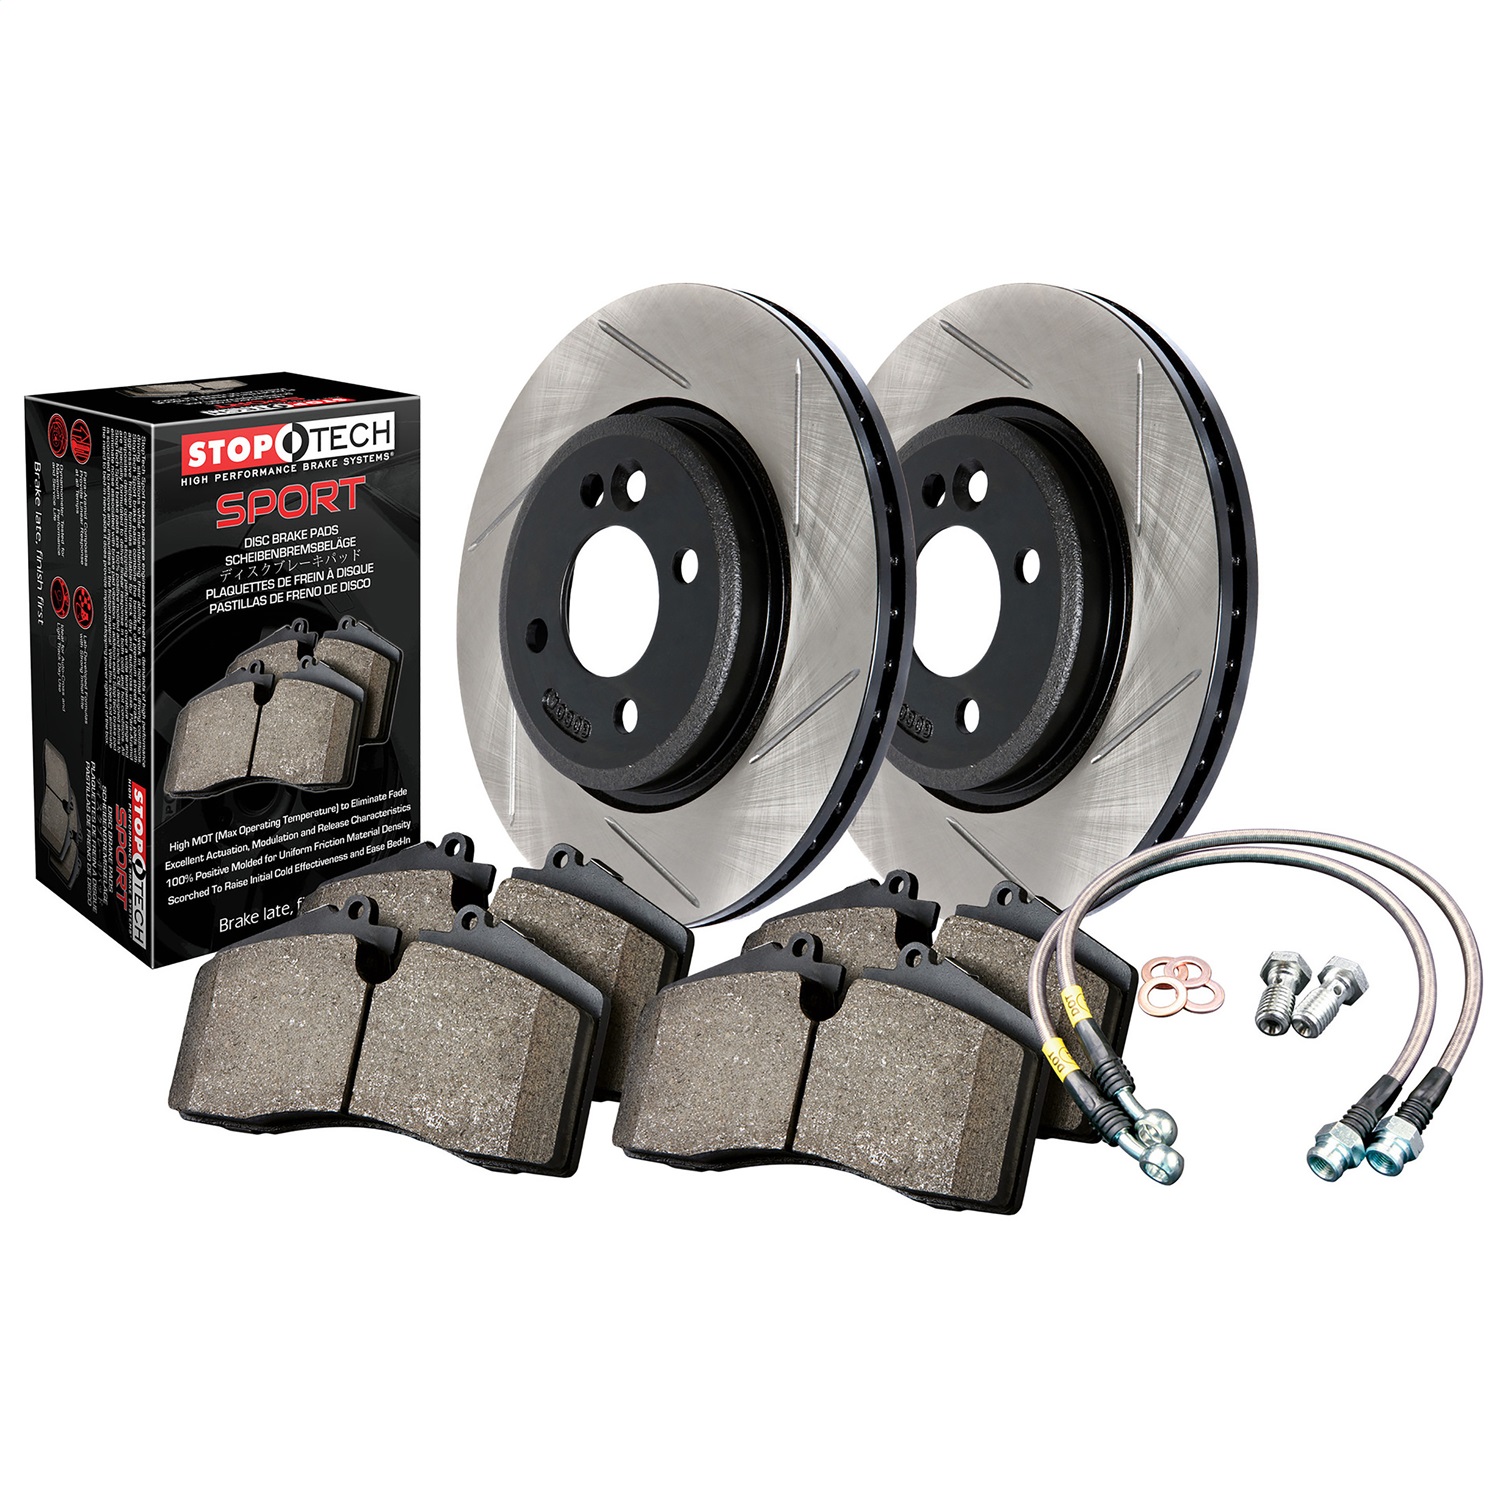 StopTech 977.34003R Sport Disc Brake Kit w/Slotted Rotors